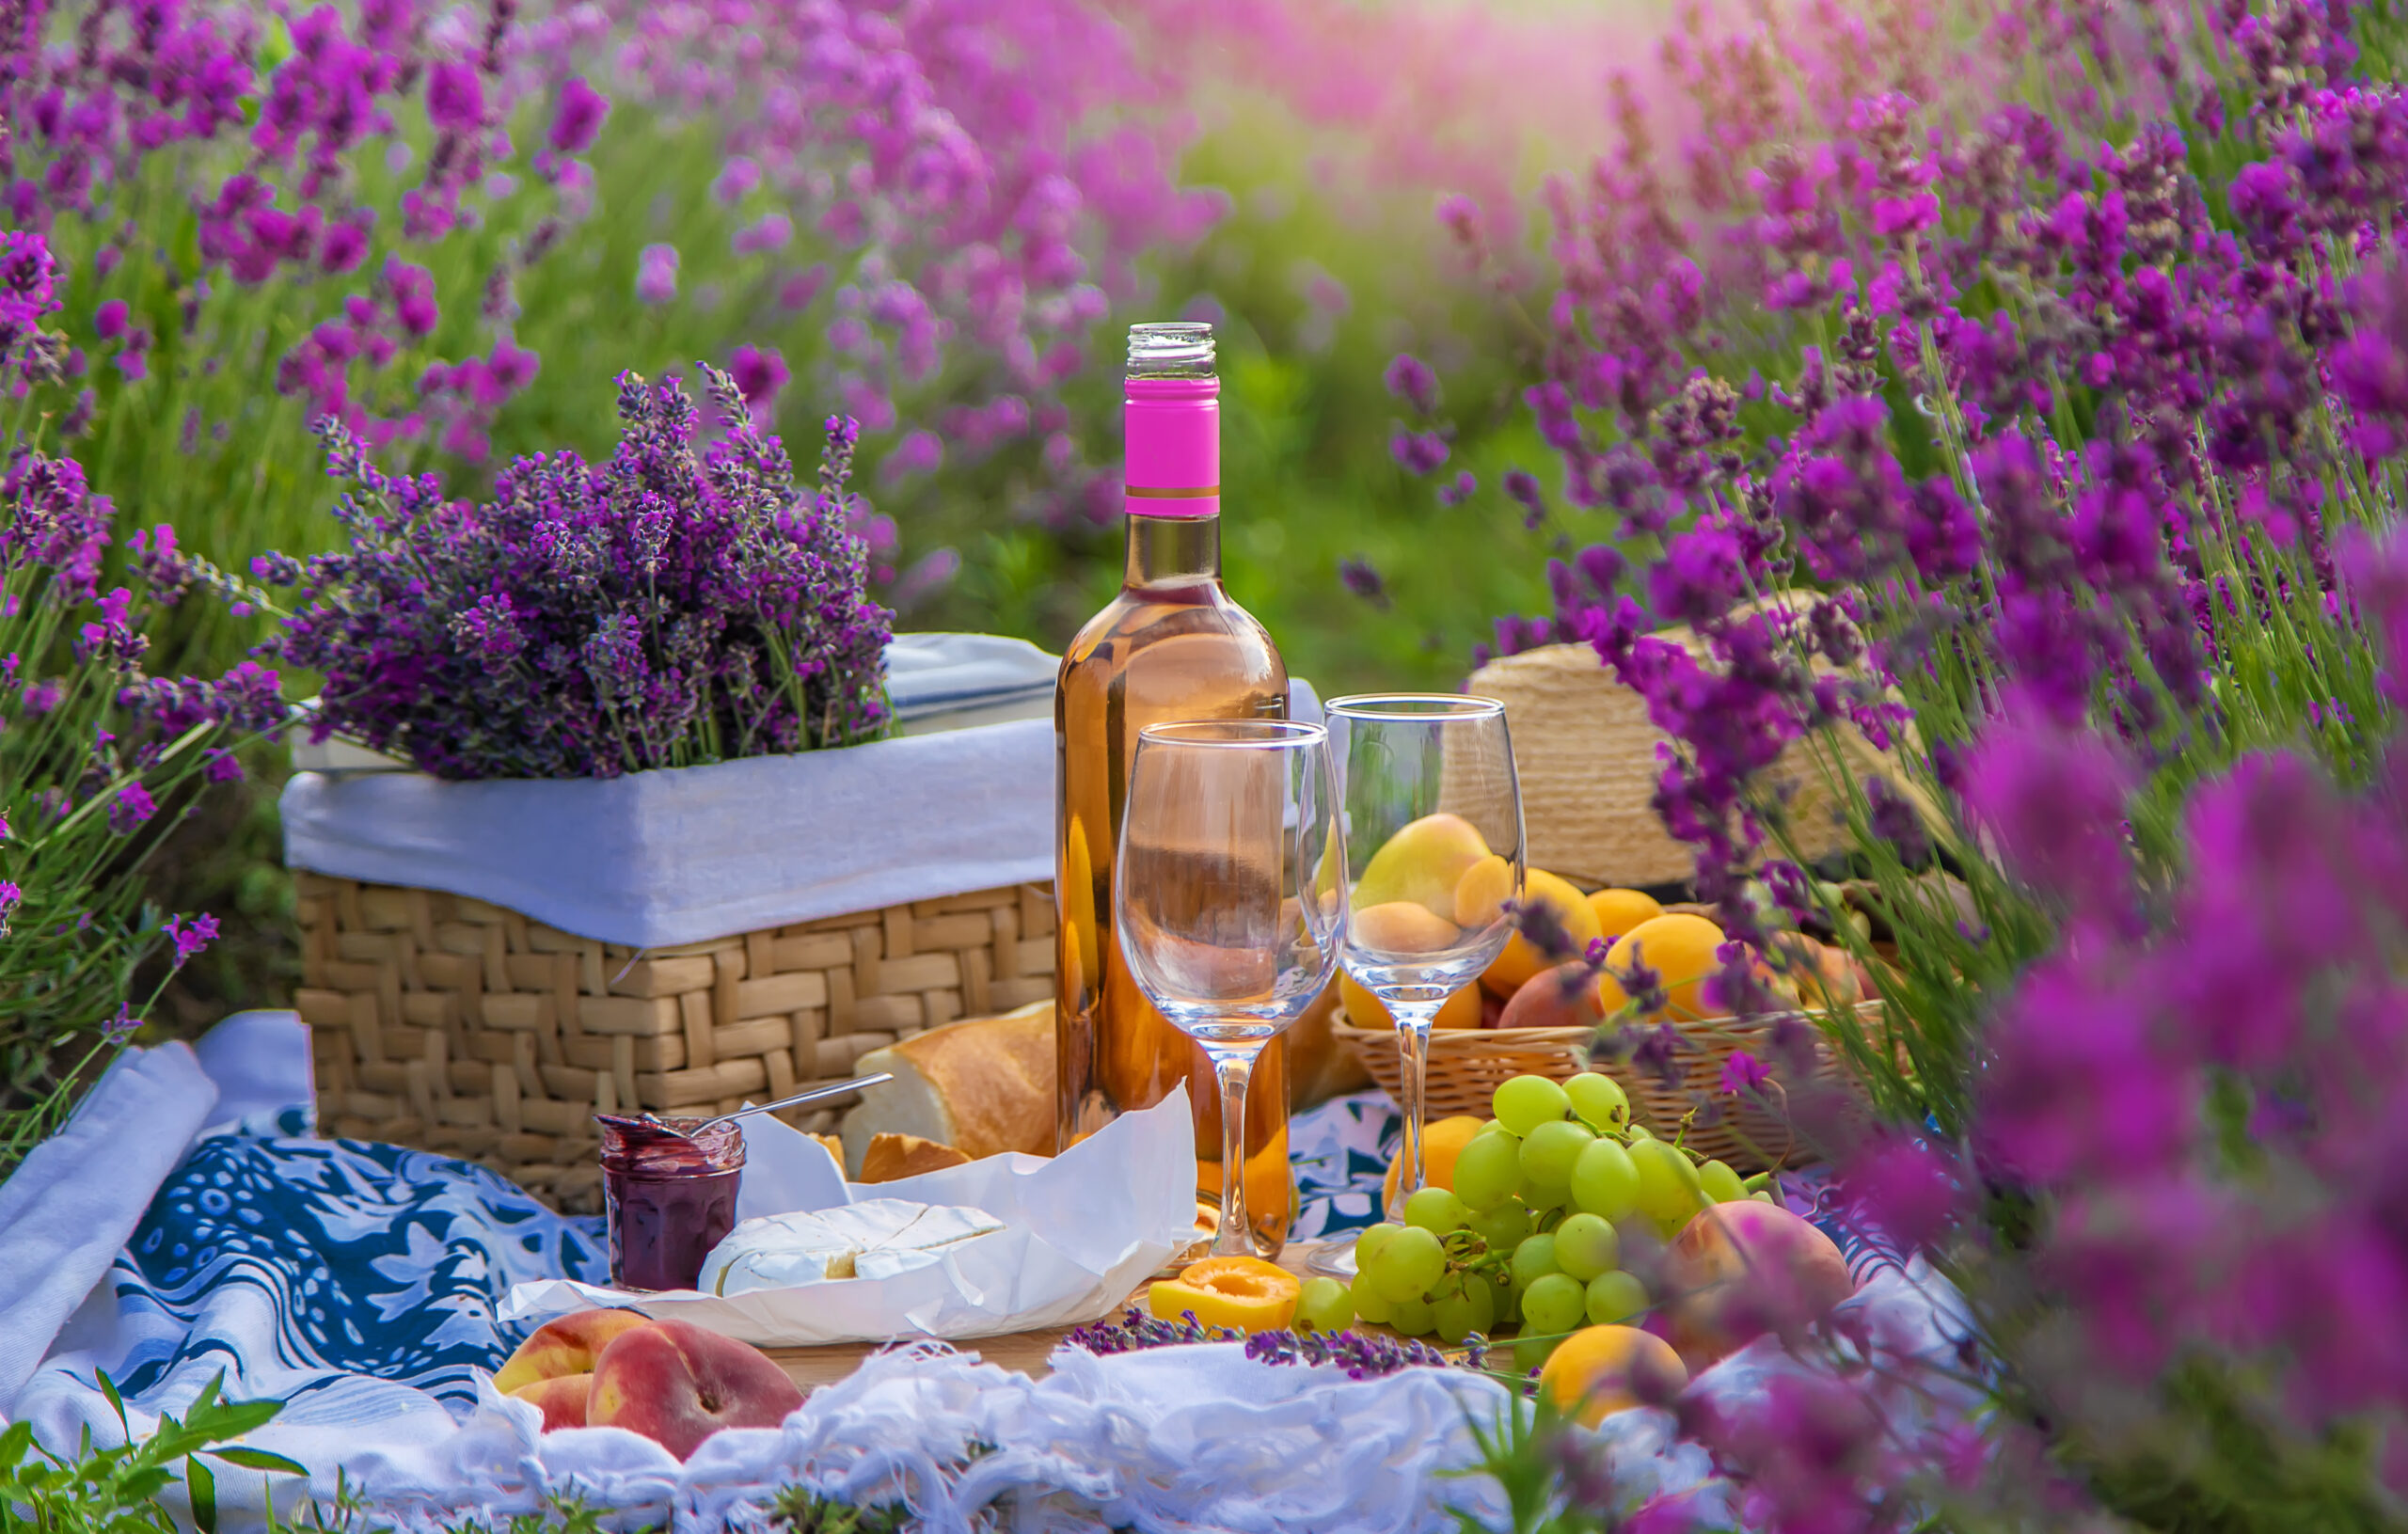 wine in a lavender field selective focus 2022 07 12 13 46 49 utc scaled 1